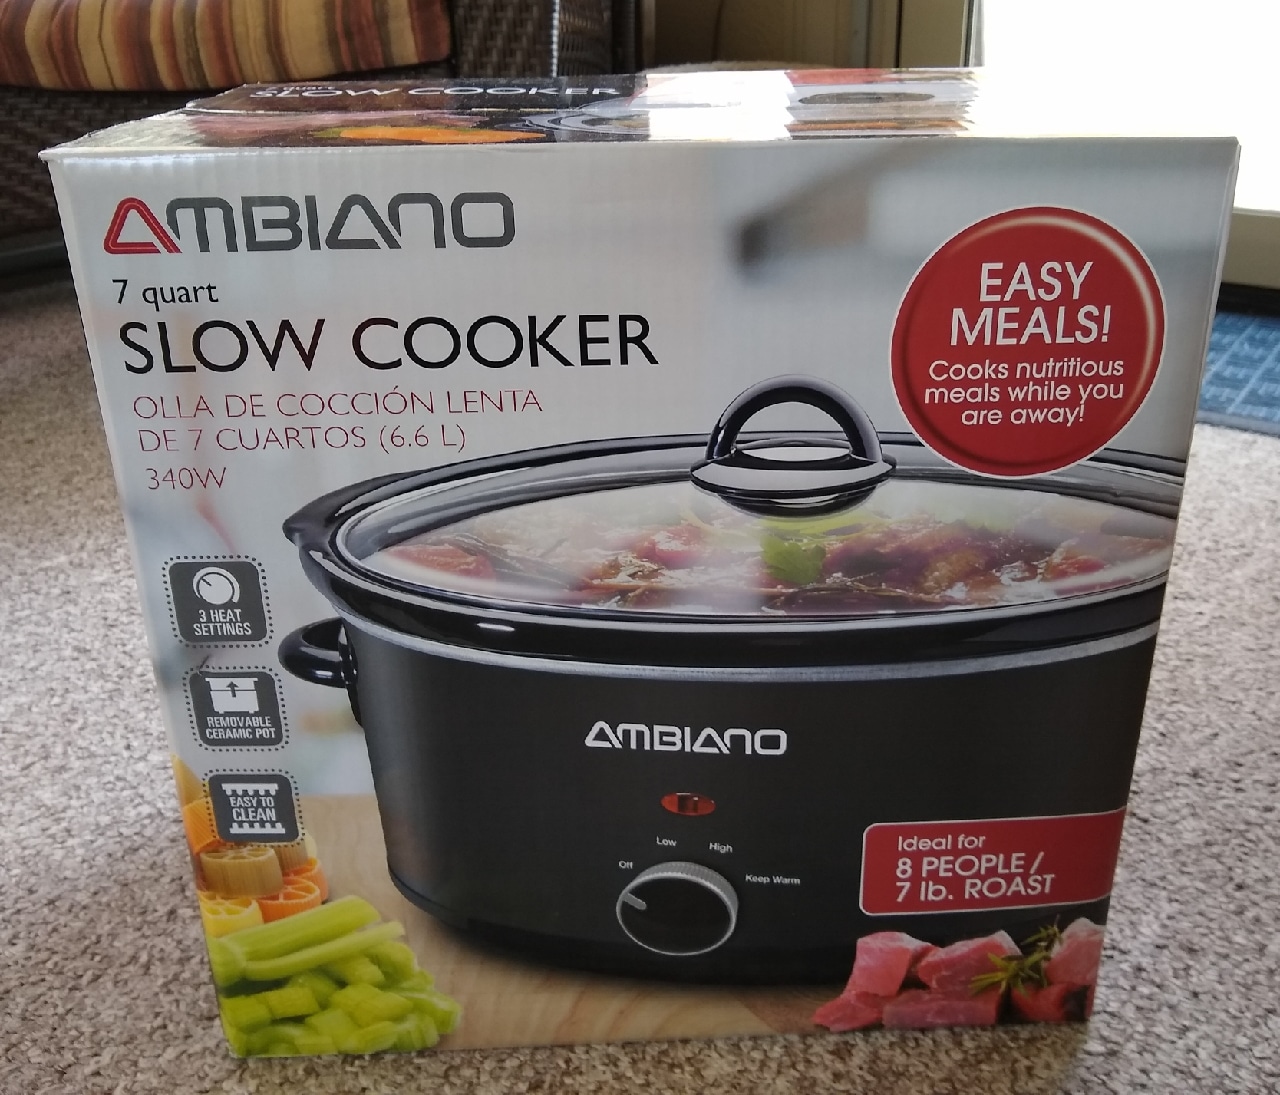 6-Quart Slow Cooker with Solid Glass Lid